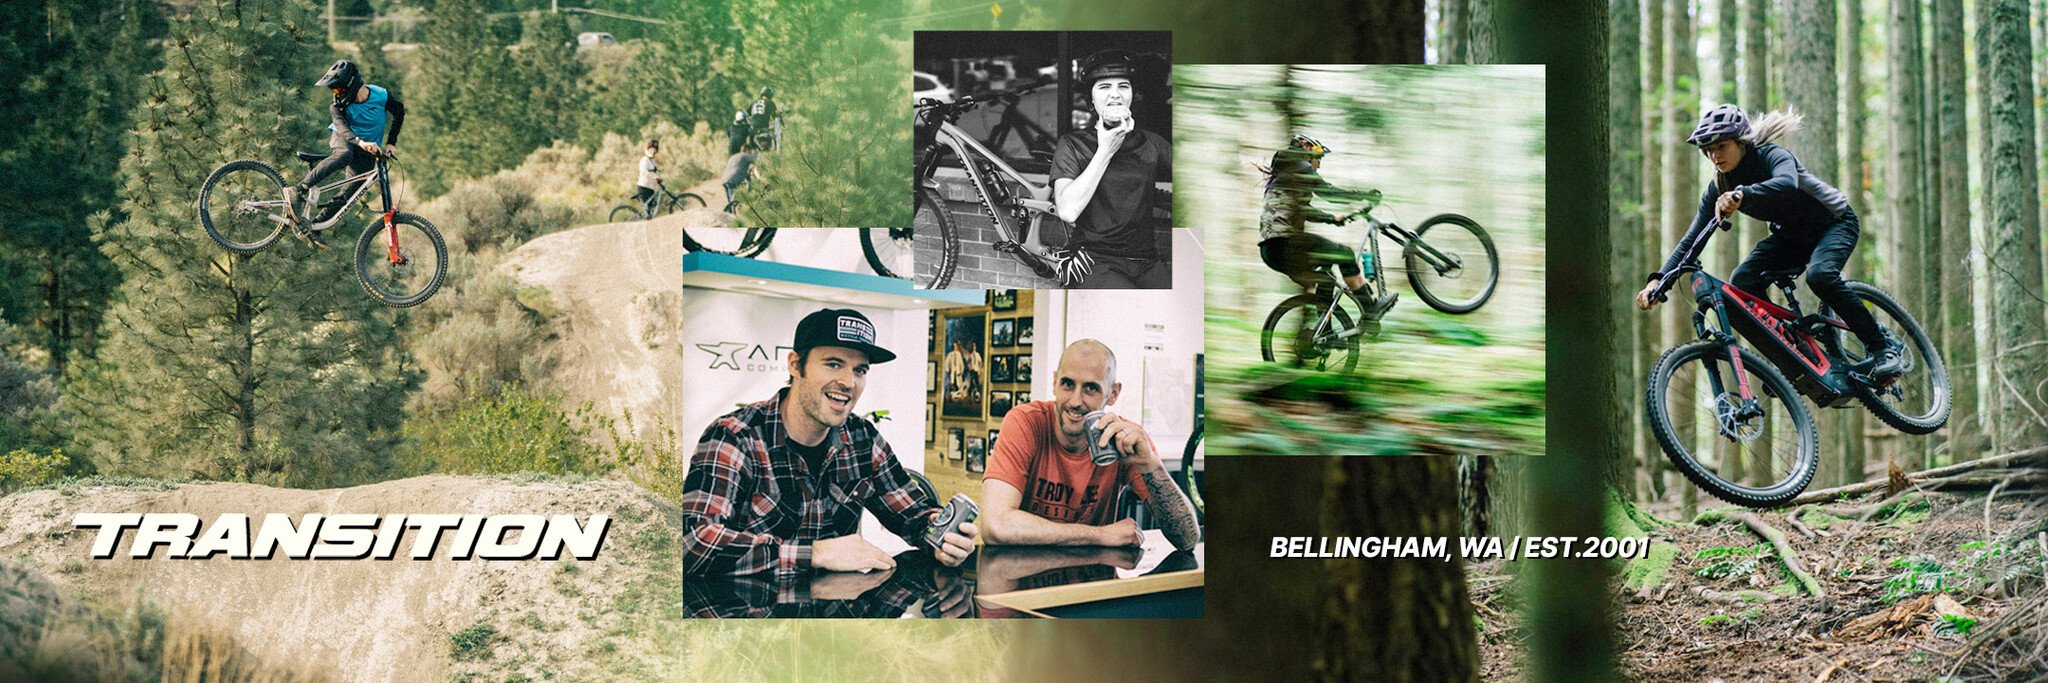 Photo collage of mountain biking related imagery pertaining to the Transition bicycle brand.